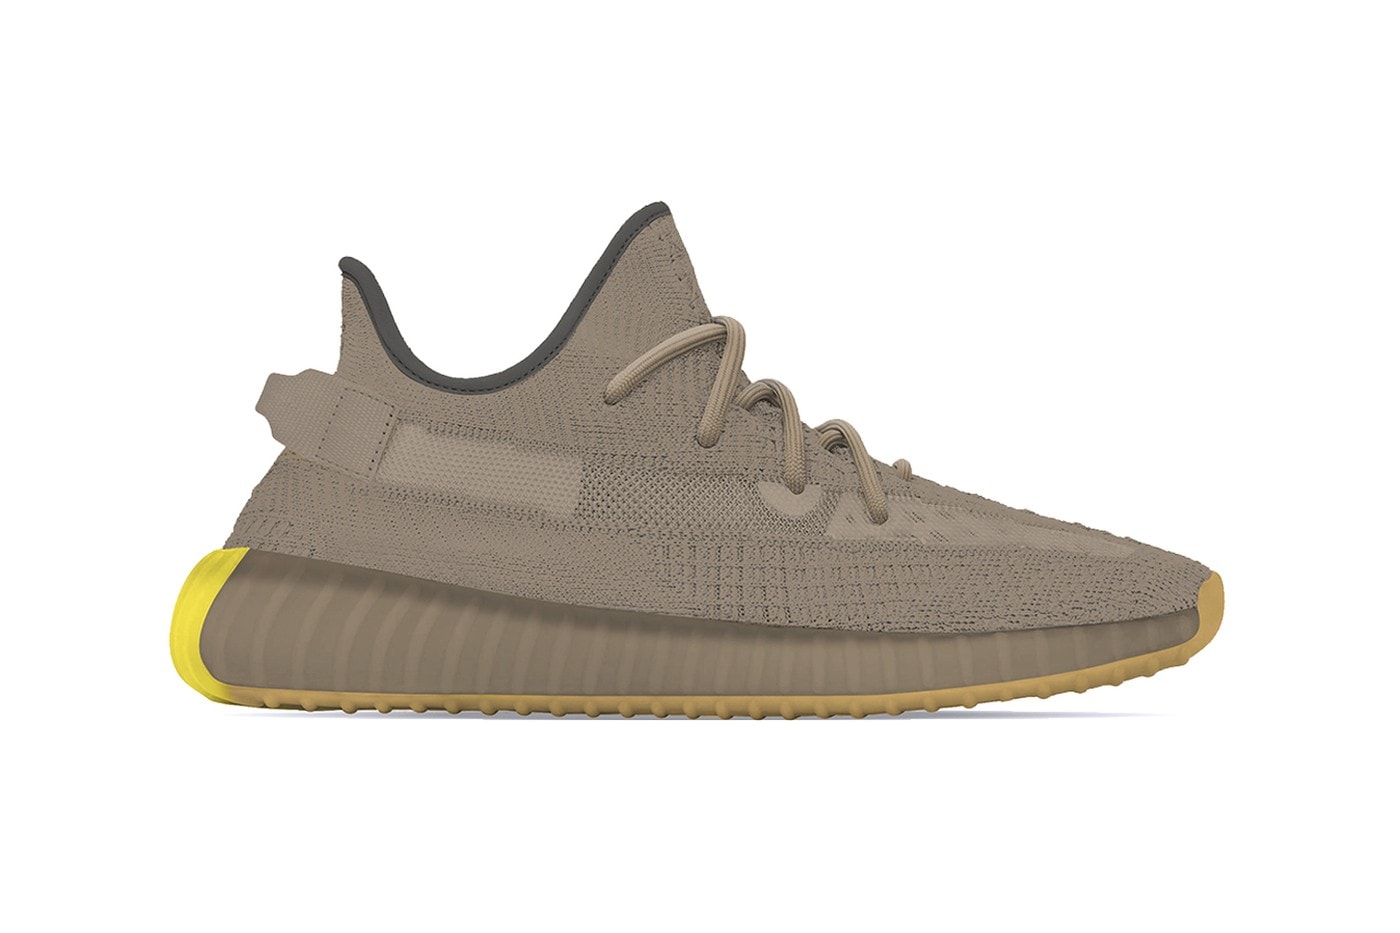 adidas YEEZY BOOST 350 V2 "Earth" Release Date Brown Grey Tonal Kanye West Sneaker Trainer